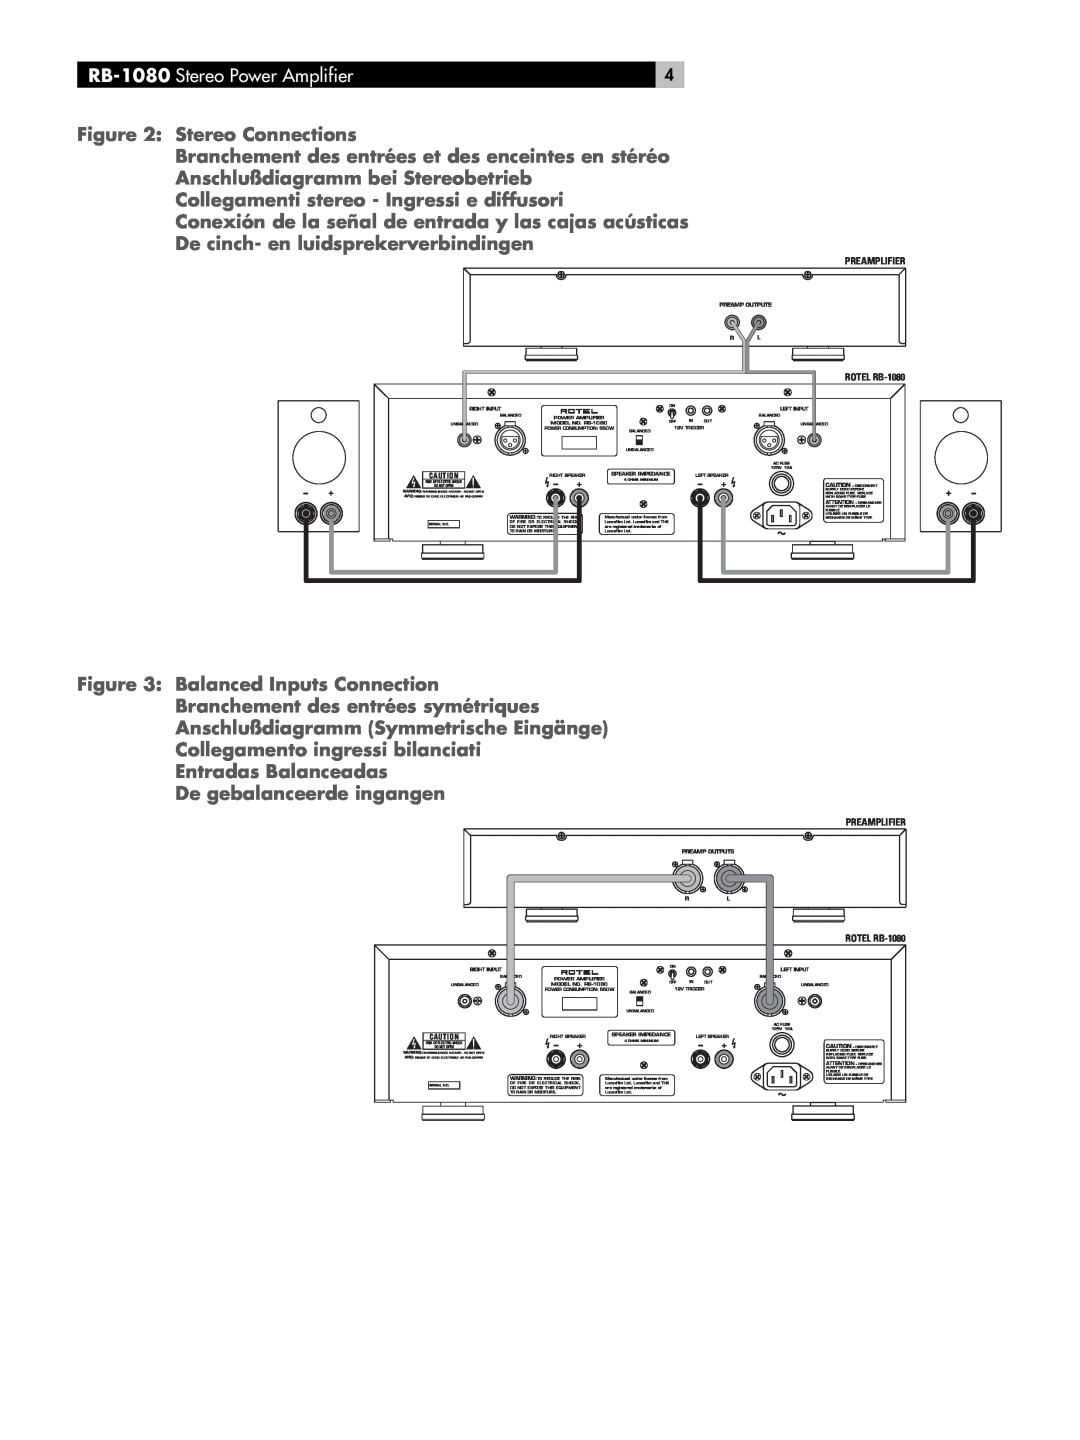 Rotel RMB-1080 owner manual RB-1080 Stereo Power Amplifier, Stereo Connections, Anschlußdiagramm bei Stereobetrieb 